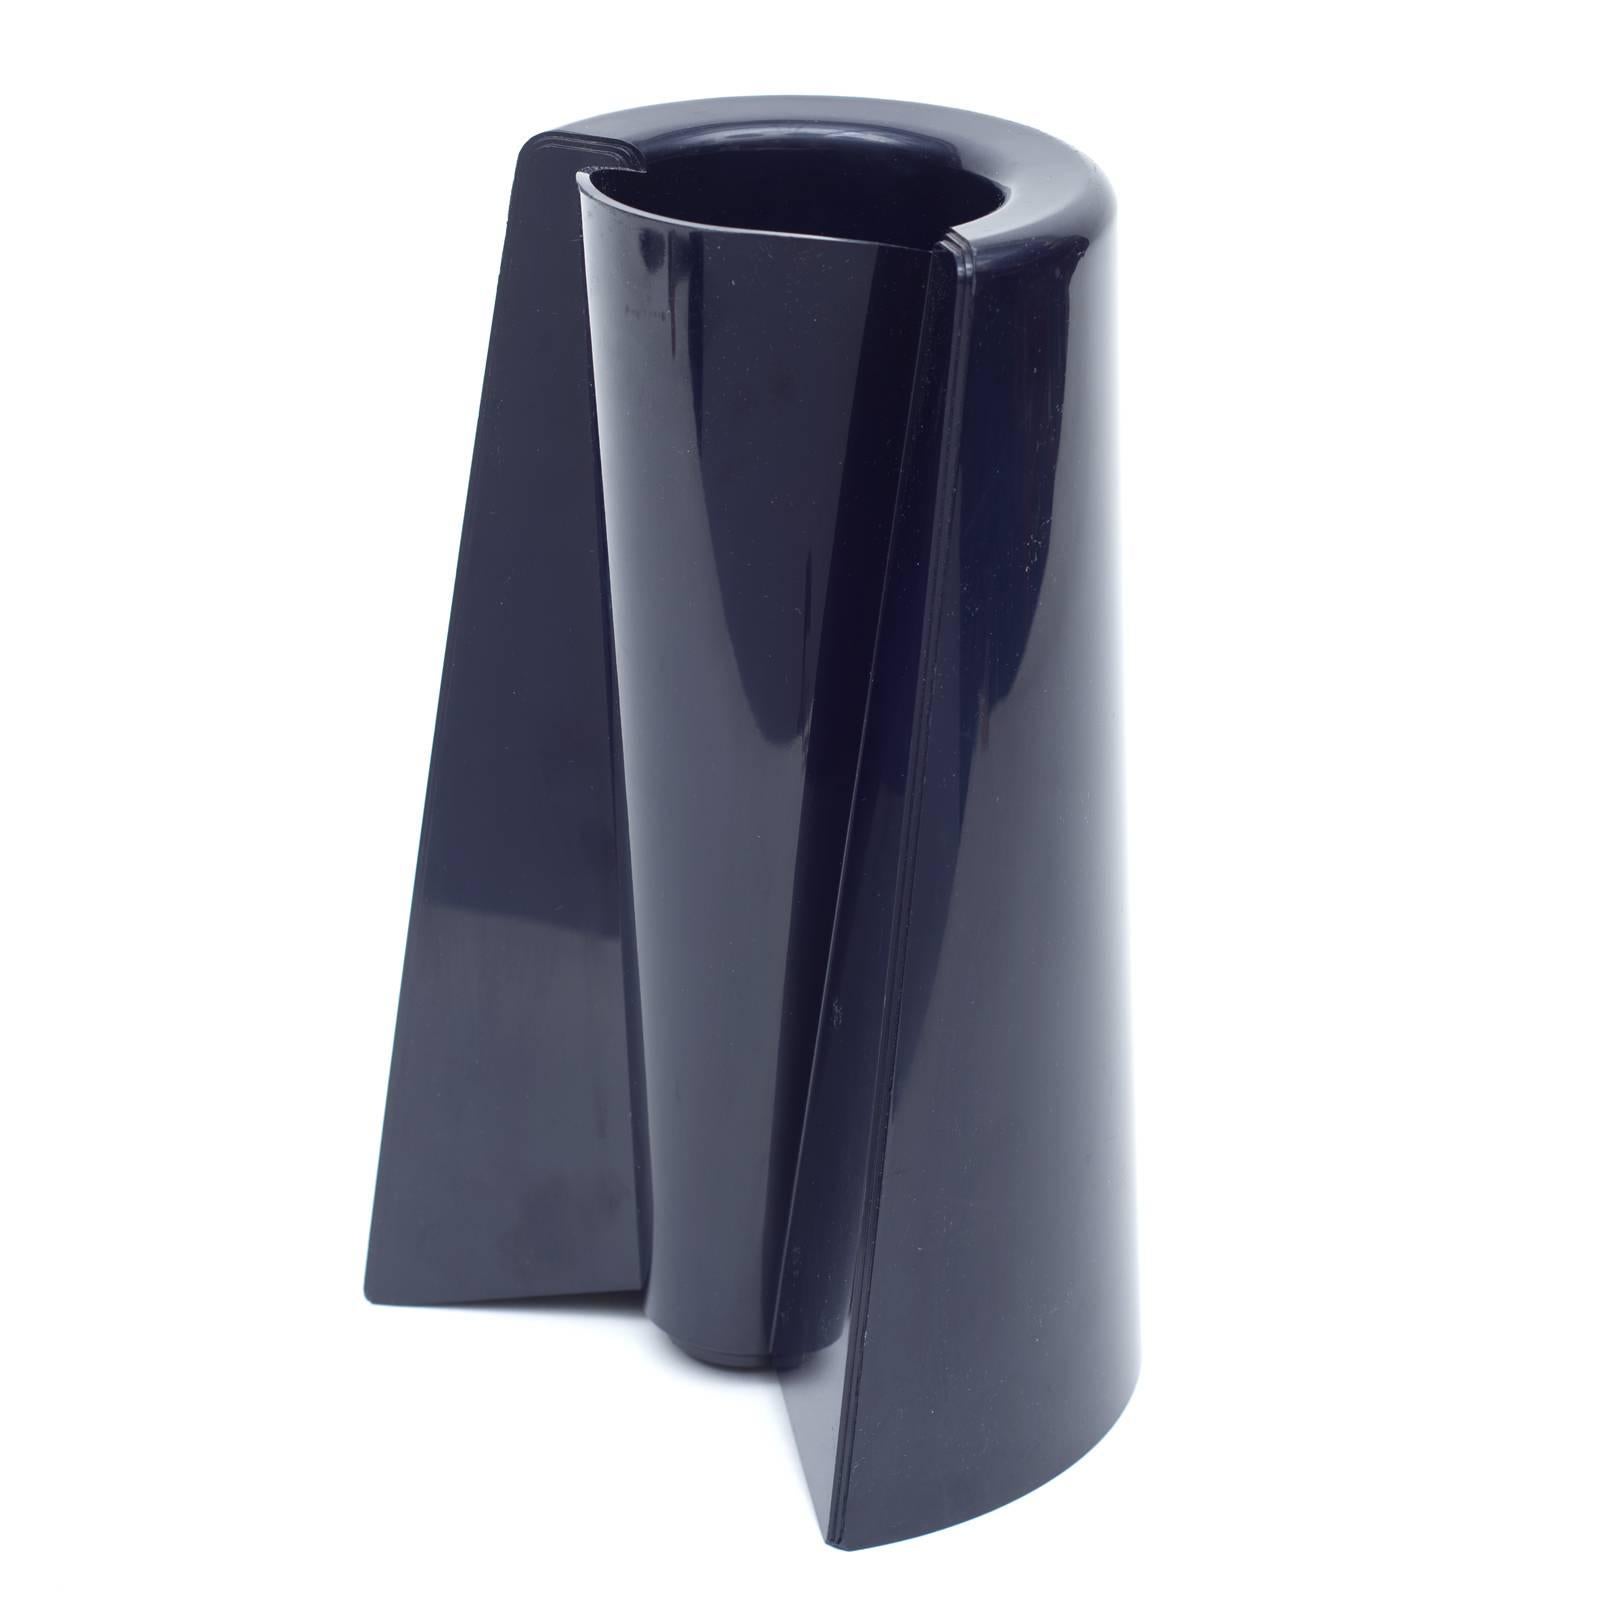 Designed by Enzo Mari in the 1960s this Pago Pago vase is black plastic and can be used standing on either end. Marked on the inside bottom of the vase.